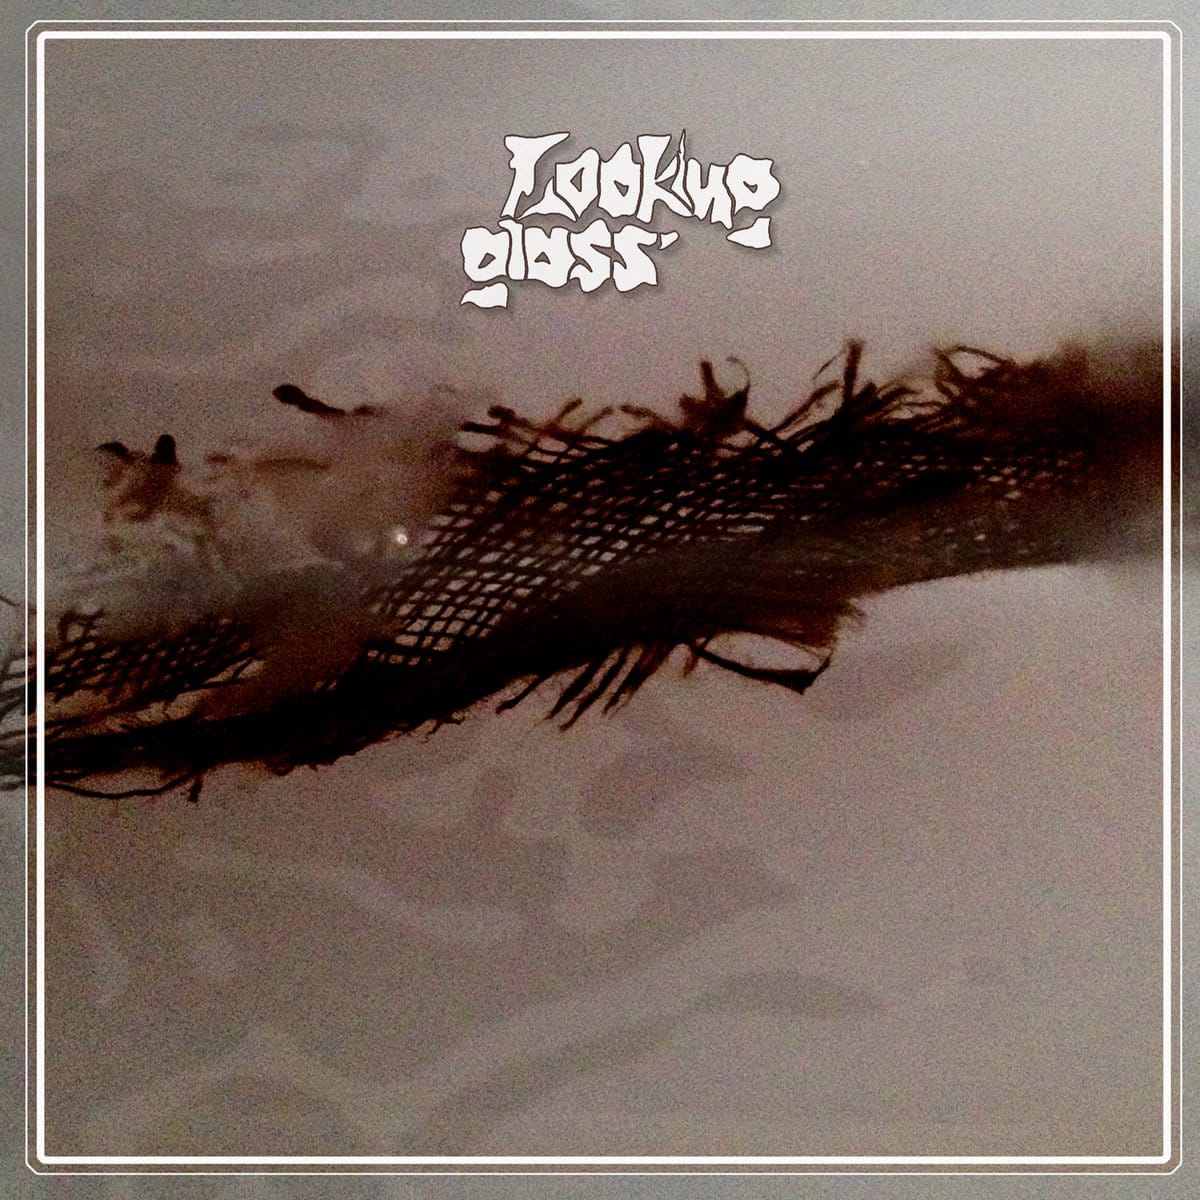 Cover art for Vol 4 by Looking Glass. Full record & mix: Infidel Studios